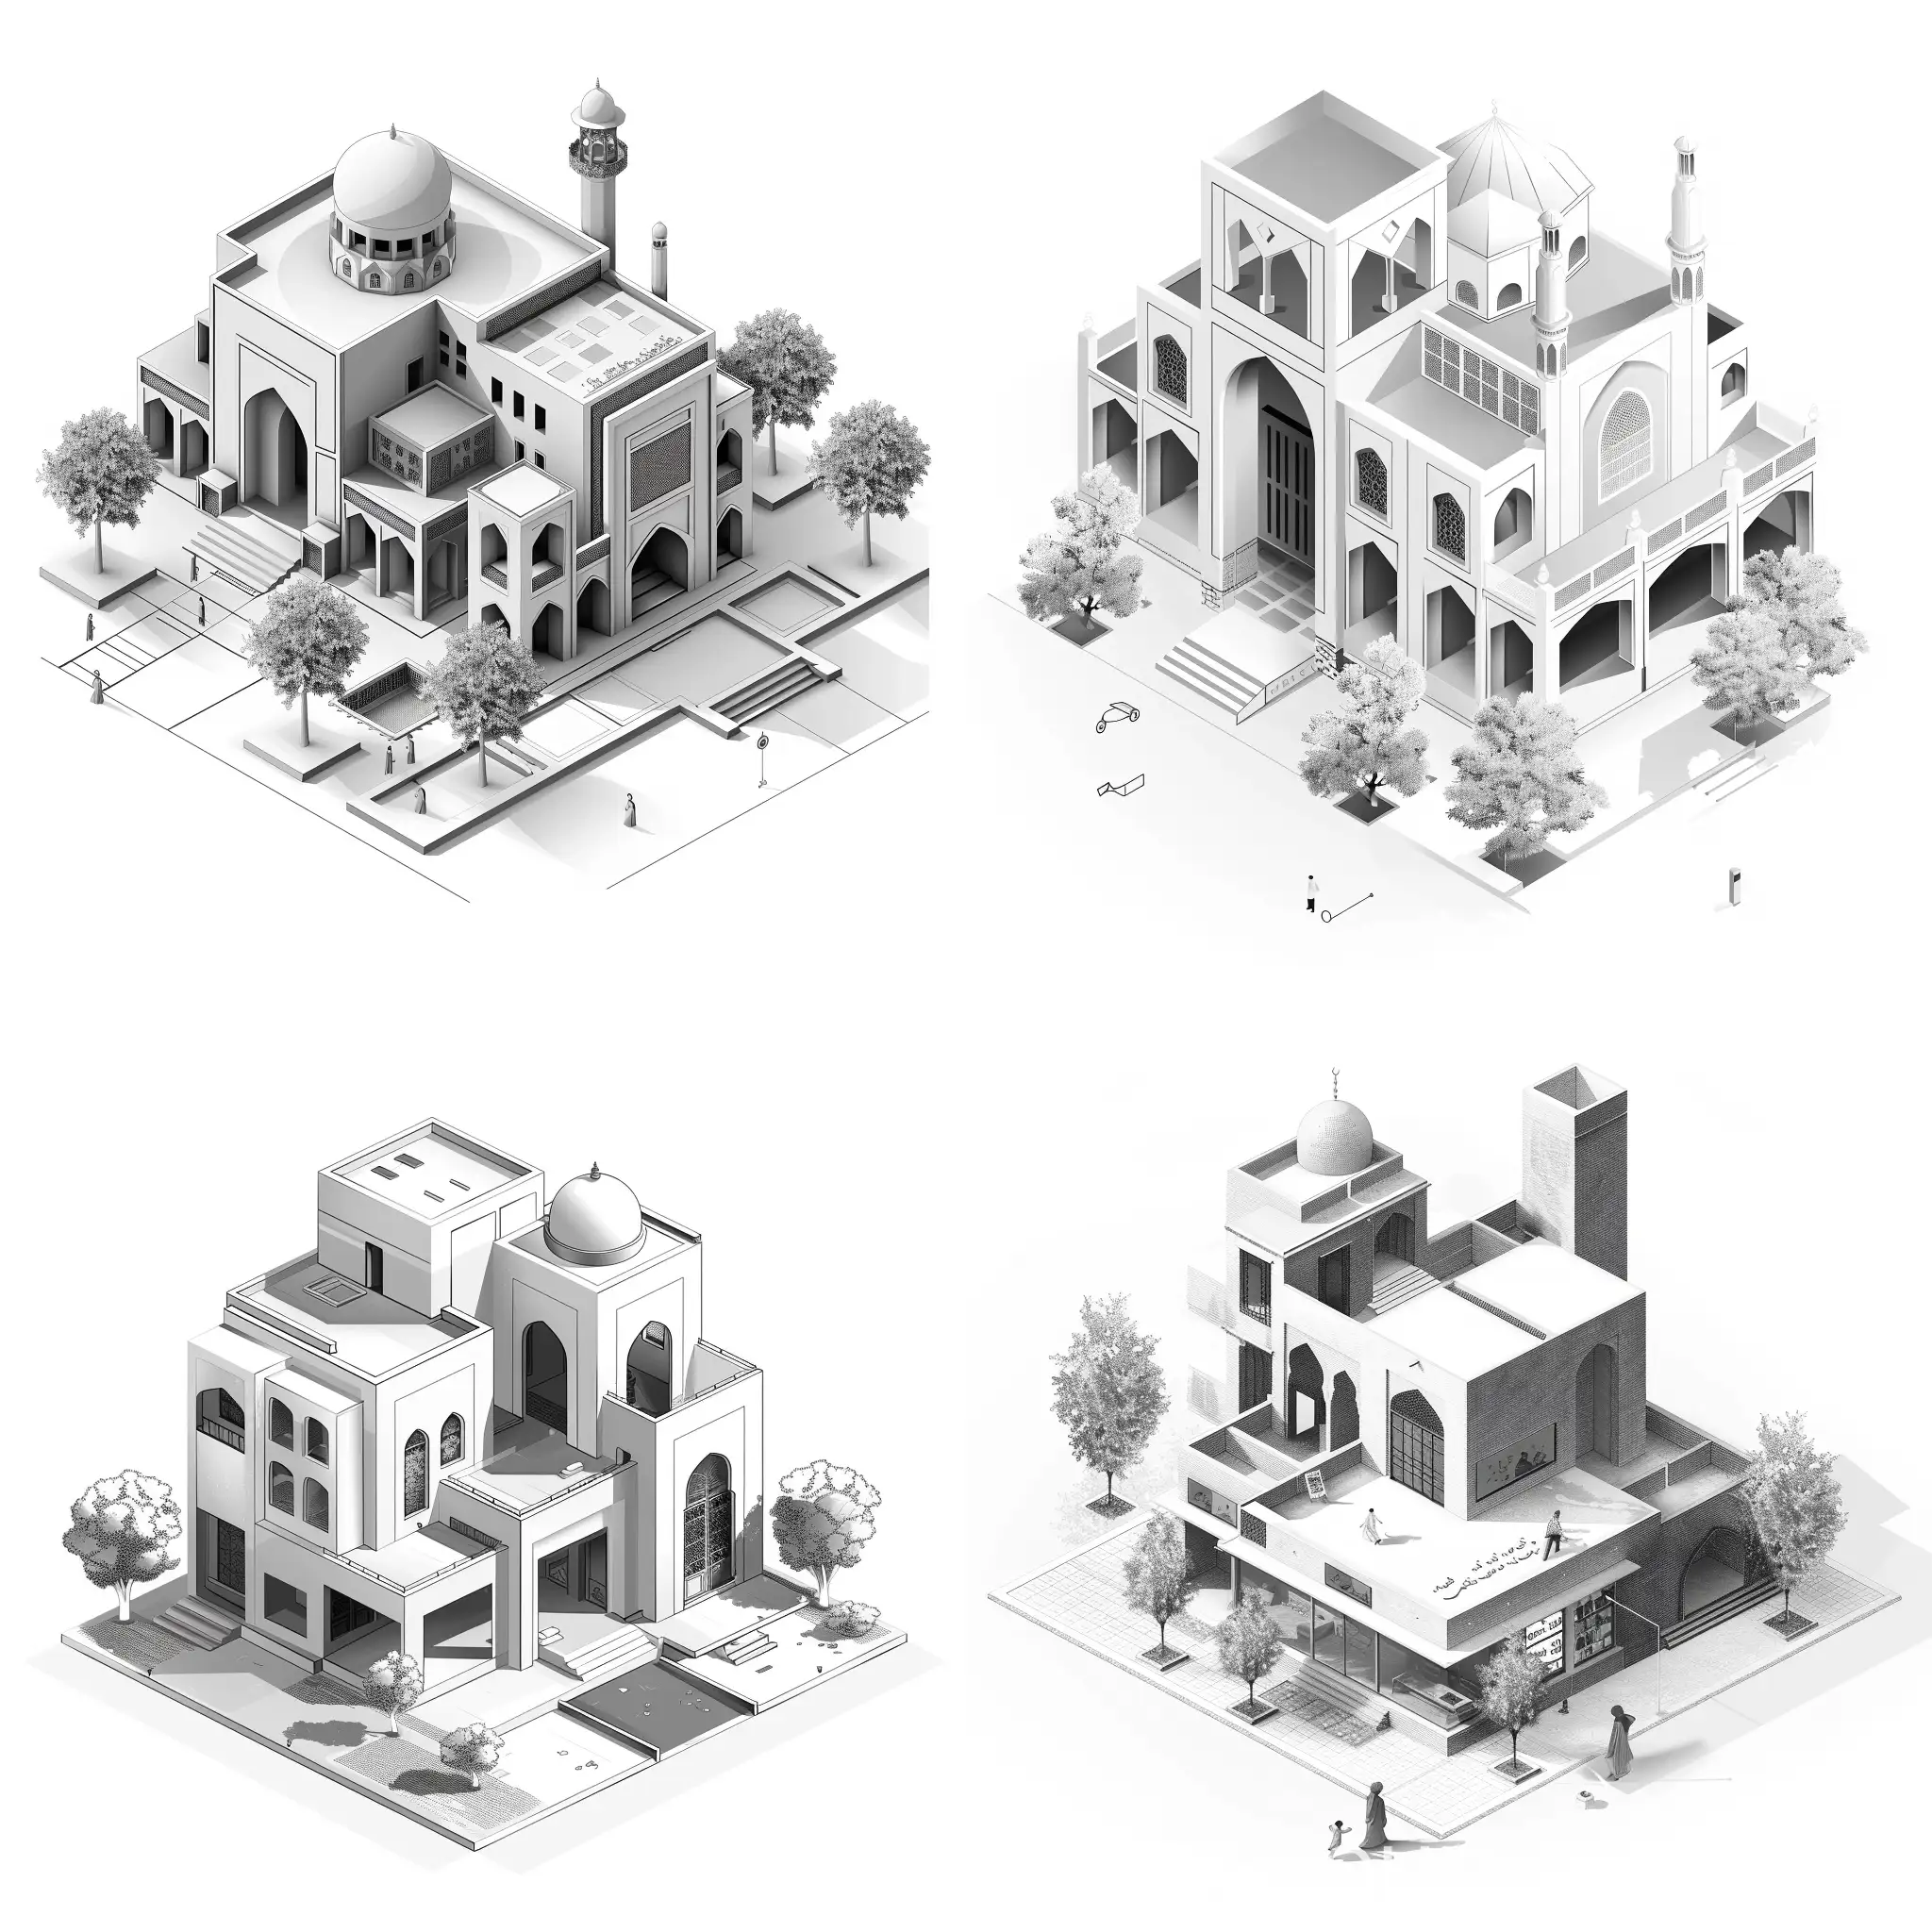 Modern architecture with signs of historical architecture ، Persian architecture ، 2d illustration ، isometric ، poster design ، monochrome ، graphic rendering ،  white background